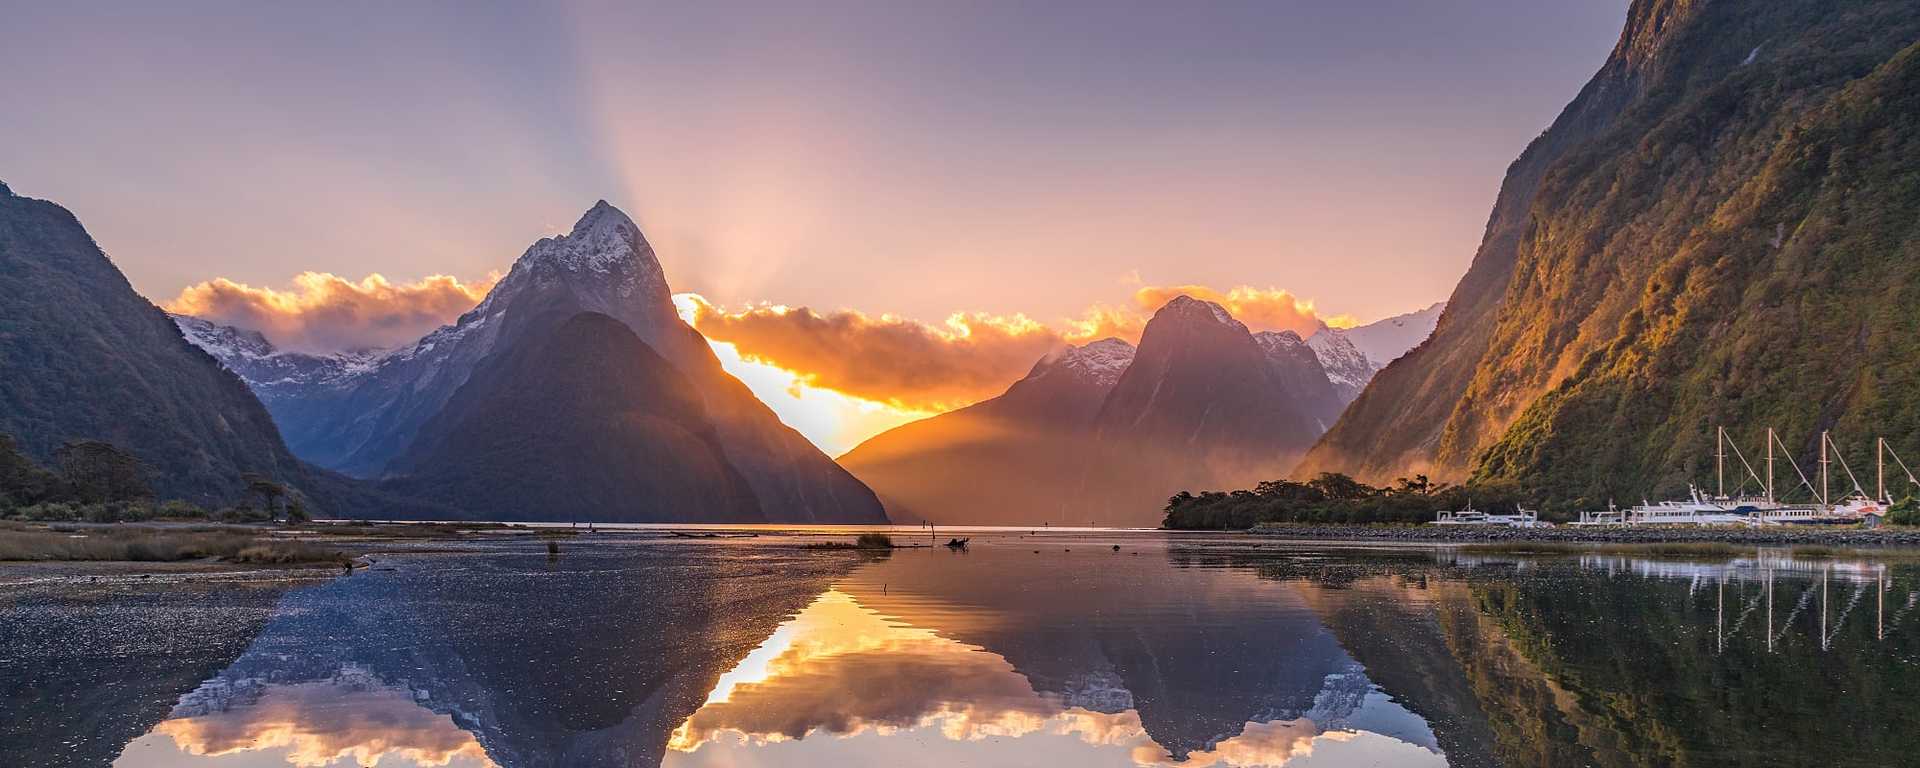 The sun bend Mitre Peak in Milford Sound, New Zealand